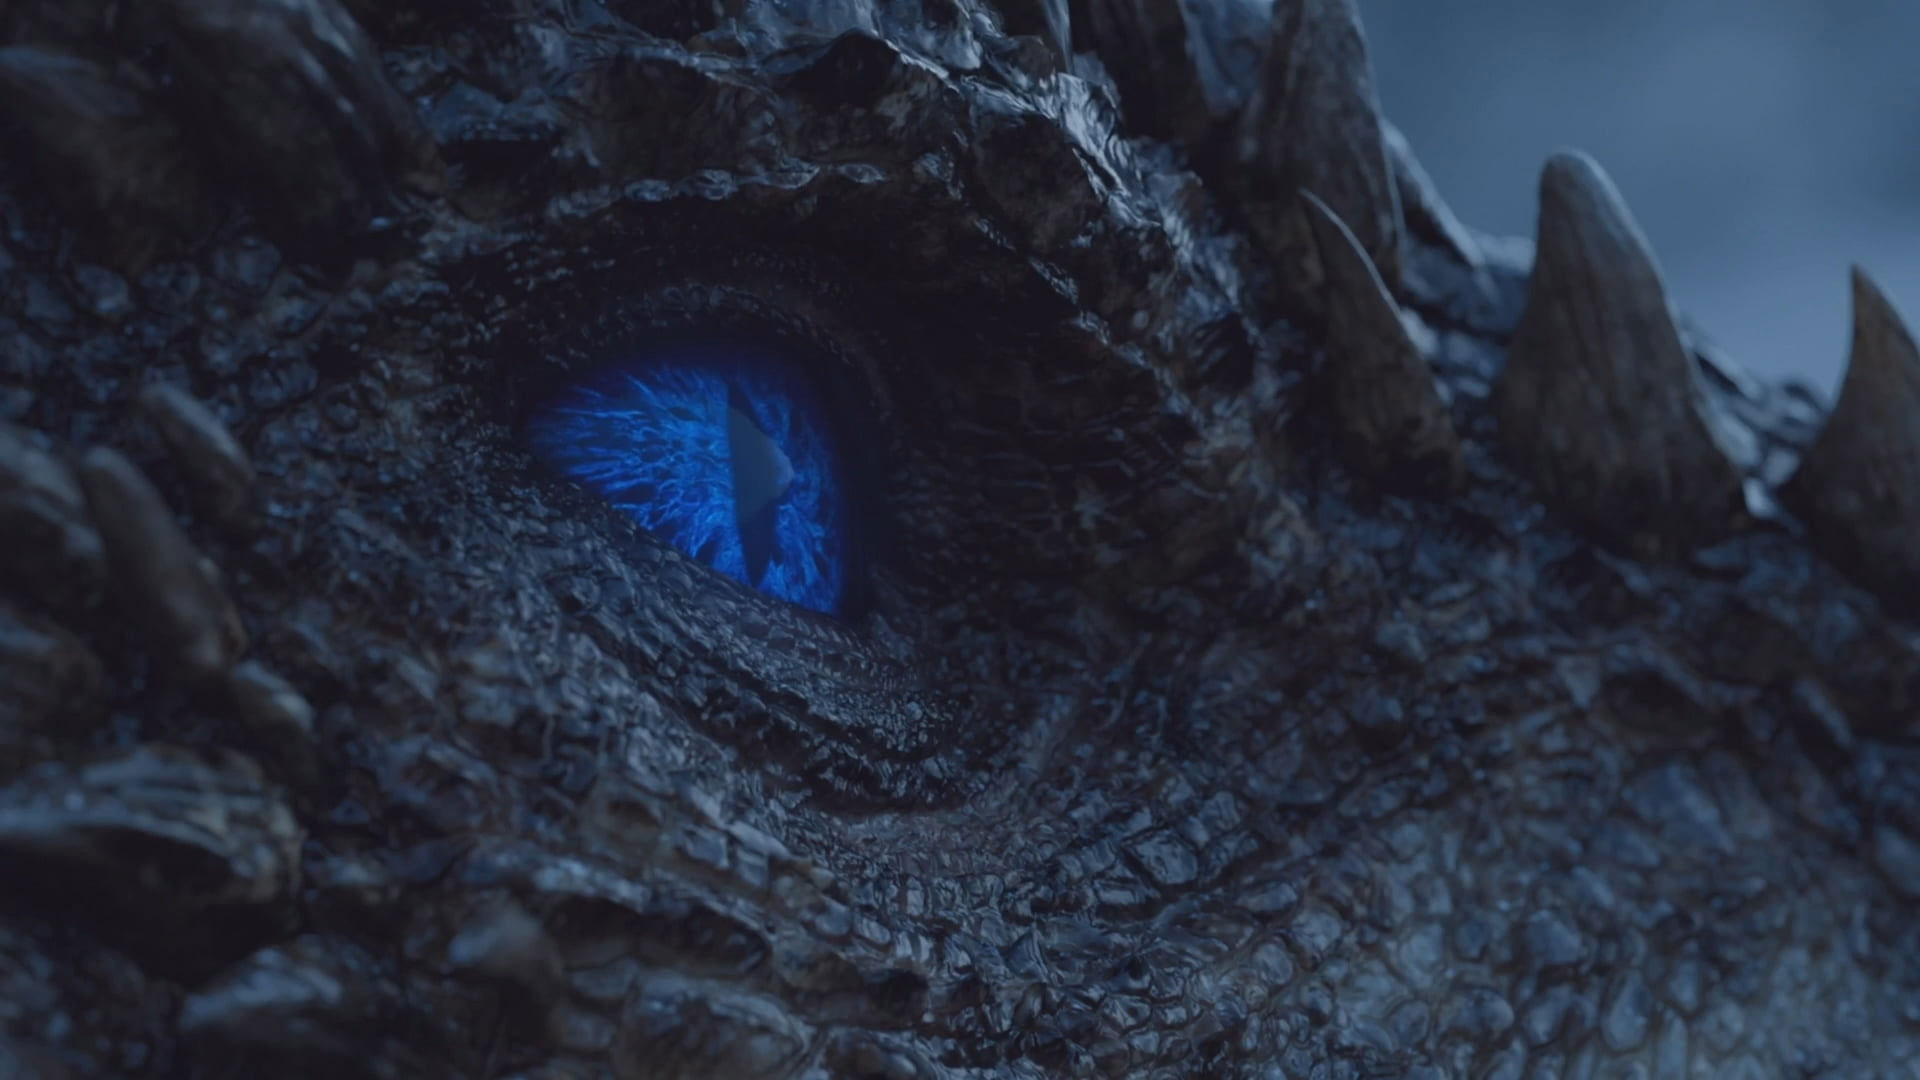 Blue animal eye wallpaper, Game of Thrones, Ice Dragon, A Song of Ice and Fire